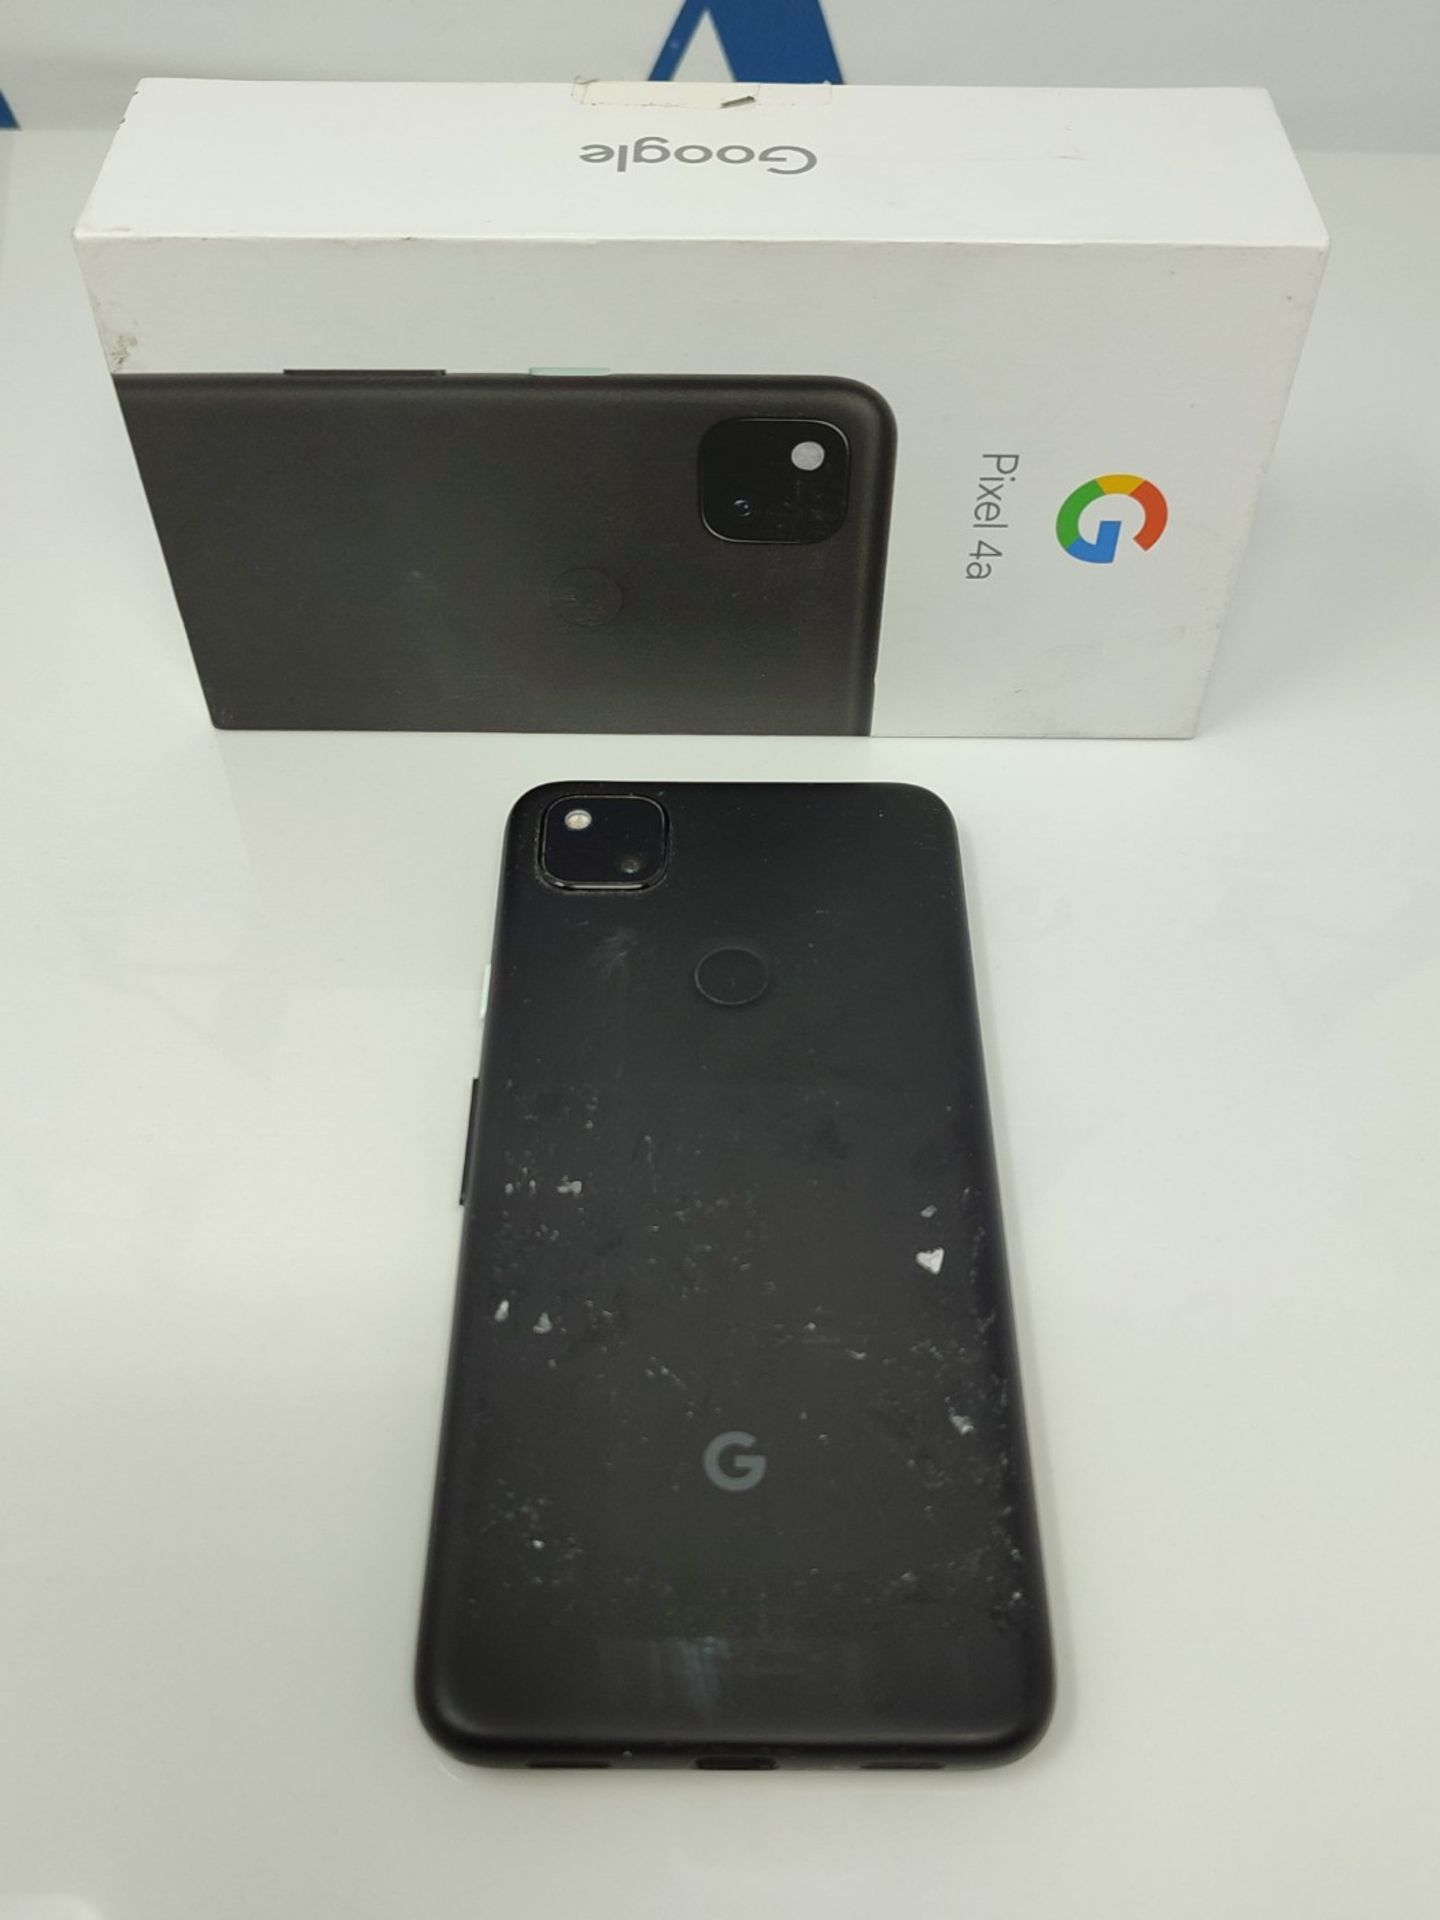 RRP £349.00 [Cracked] Google Pixel 4a Android Mobile Phone- Black, 128GB, 24 hour battery, Nightsi - Image 3 of 3